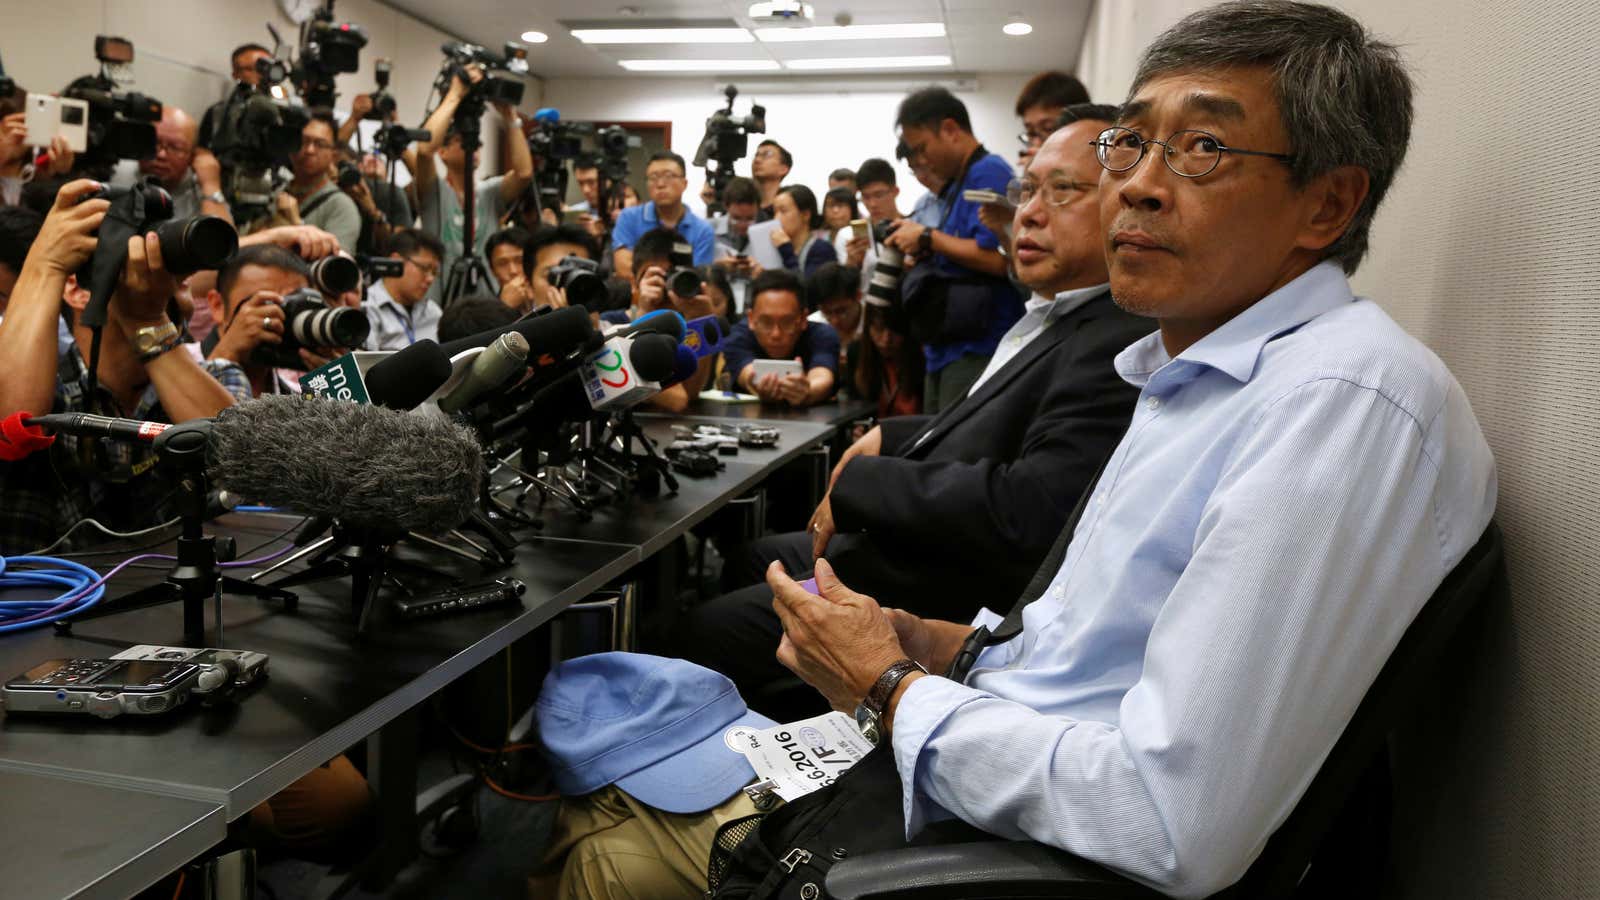 Lam Wing-kee, one of the five booksellers detained in China, at a press conference in Hong Kong